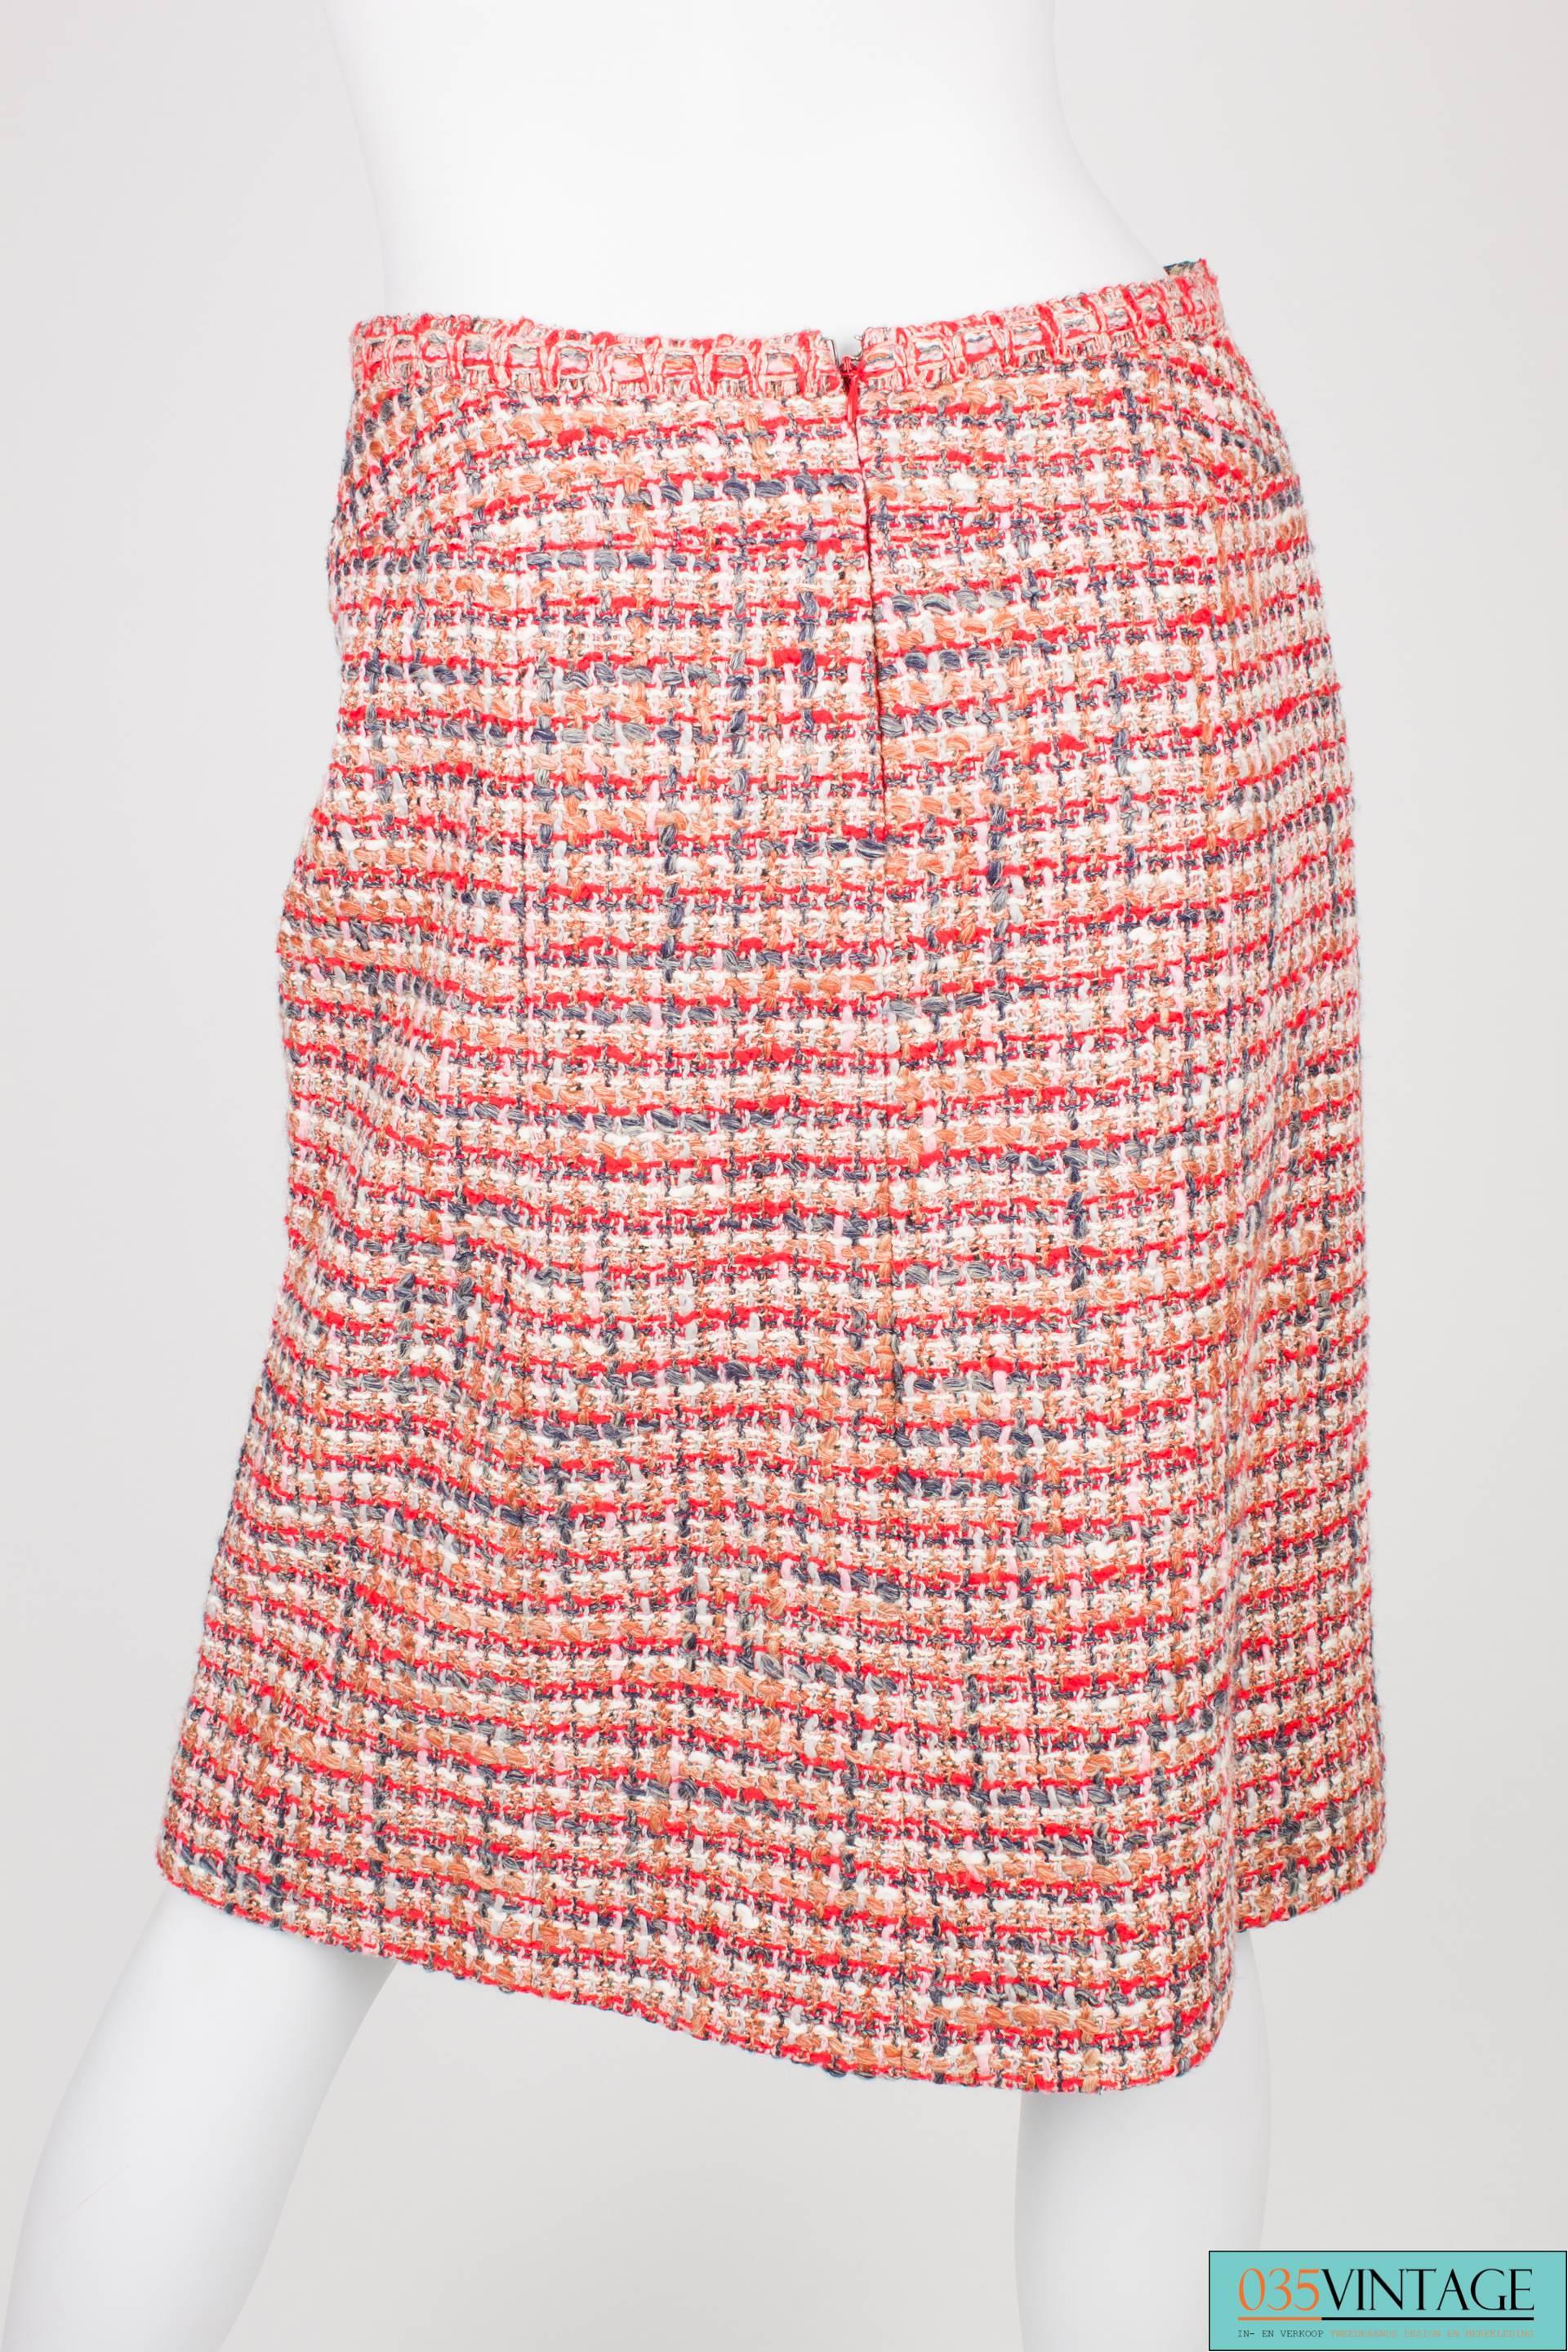 Chanel 3-pcs Suit Jacket, Skirt & Top - red/gray/pink/white 2003 4